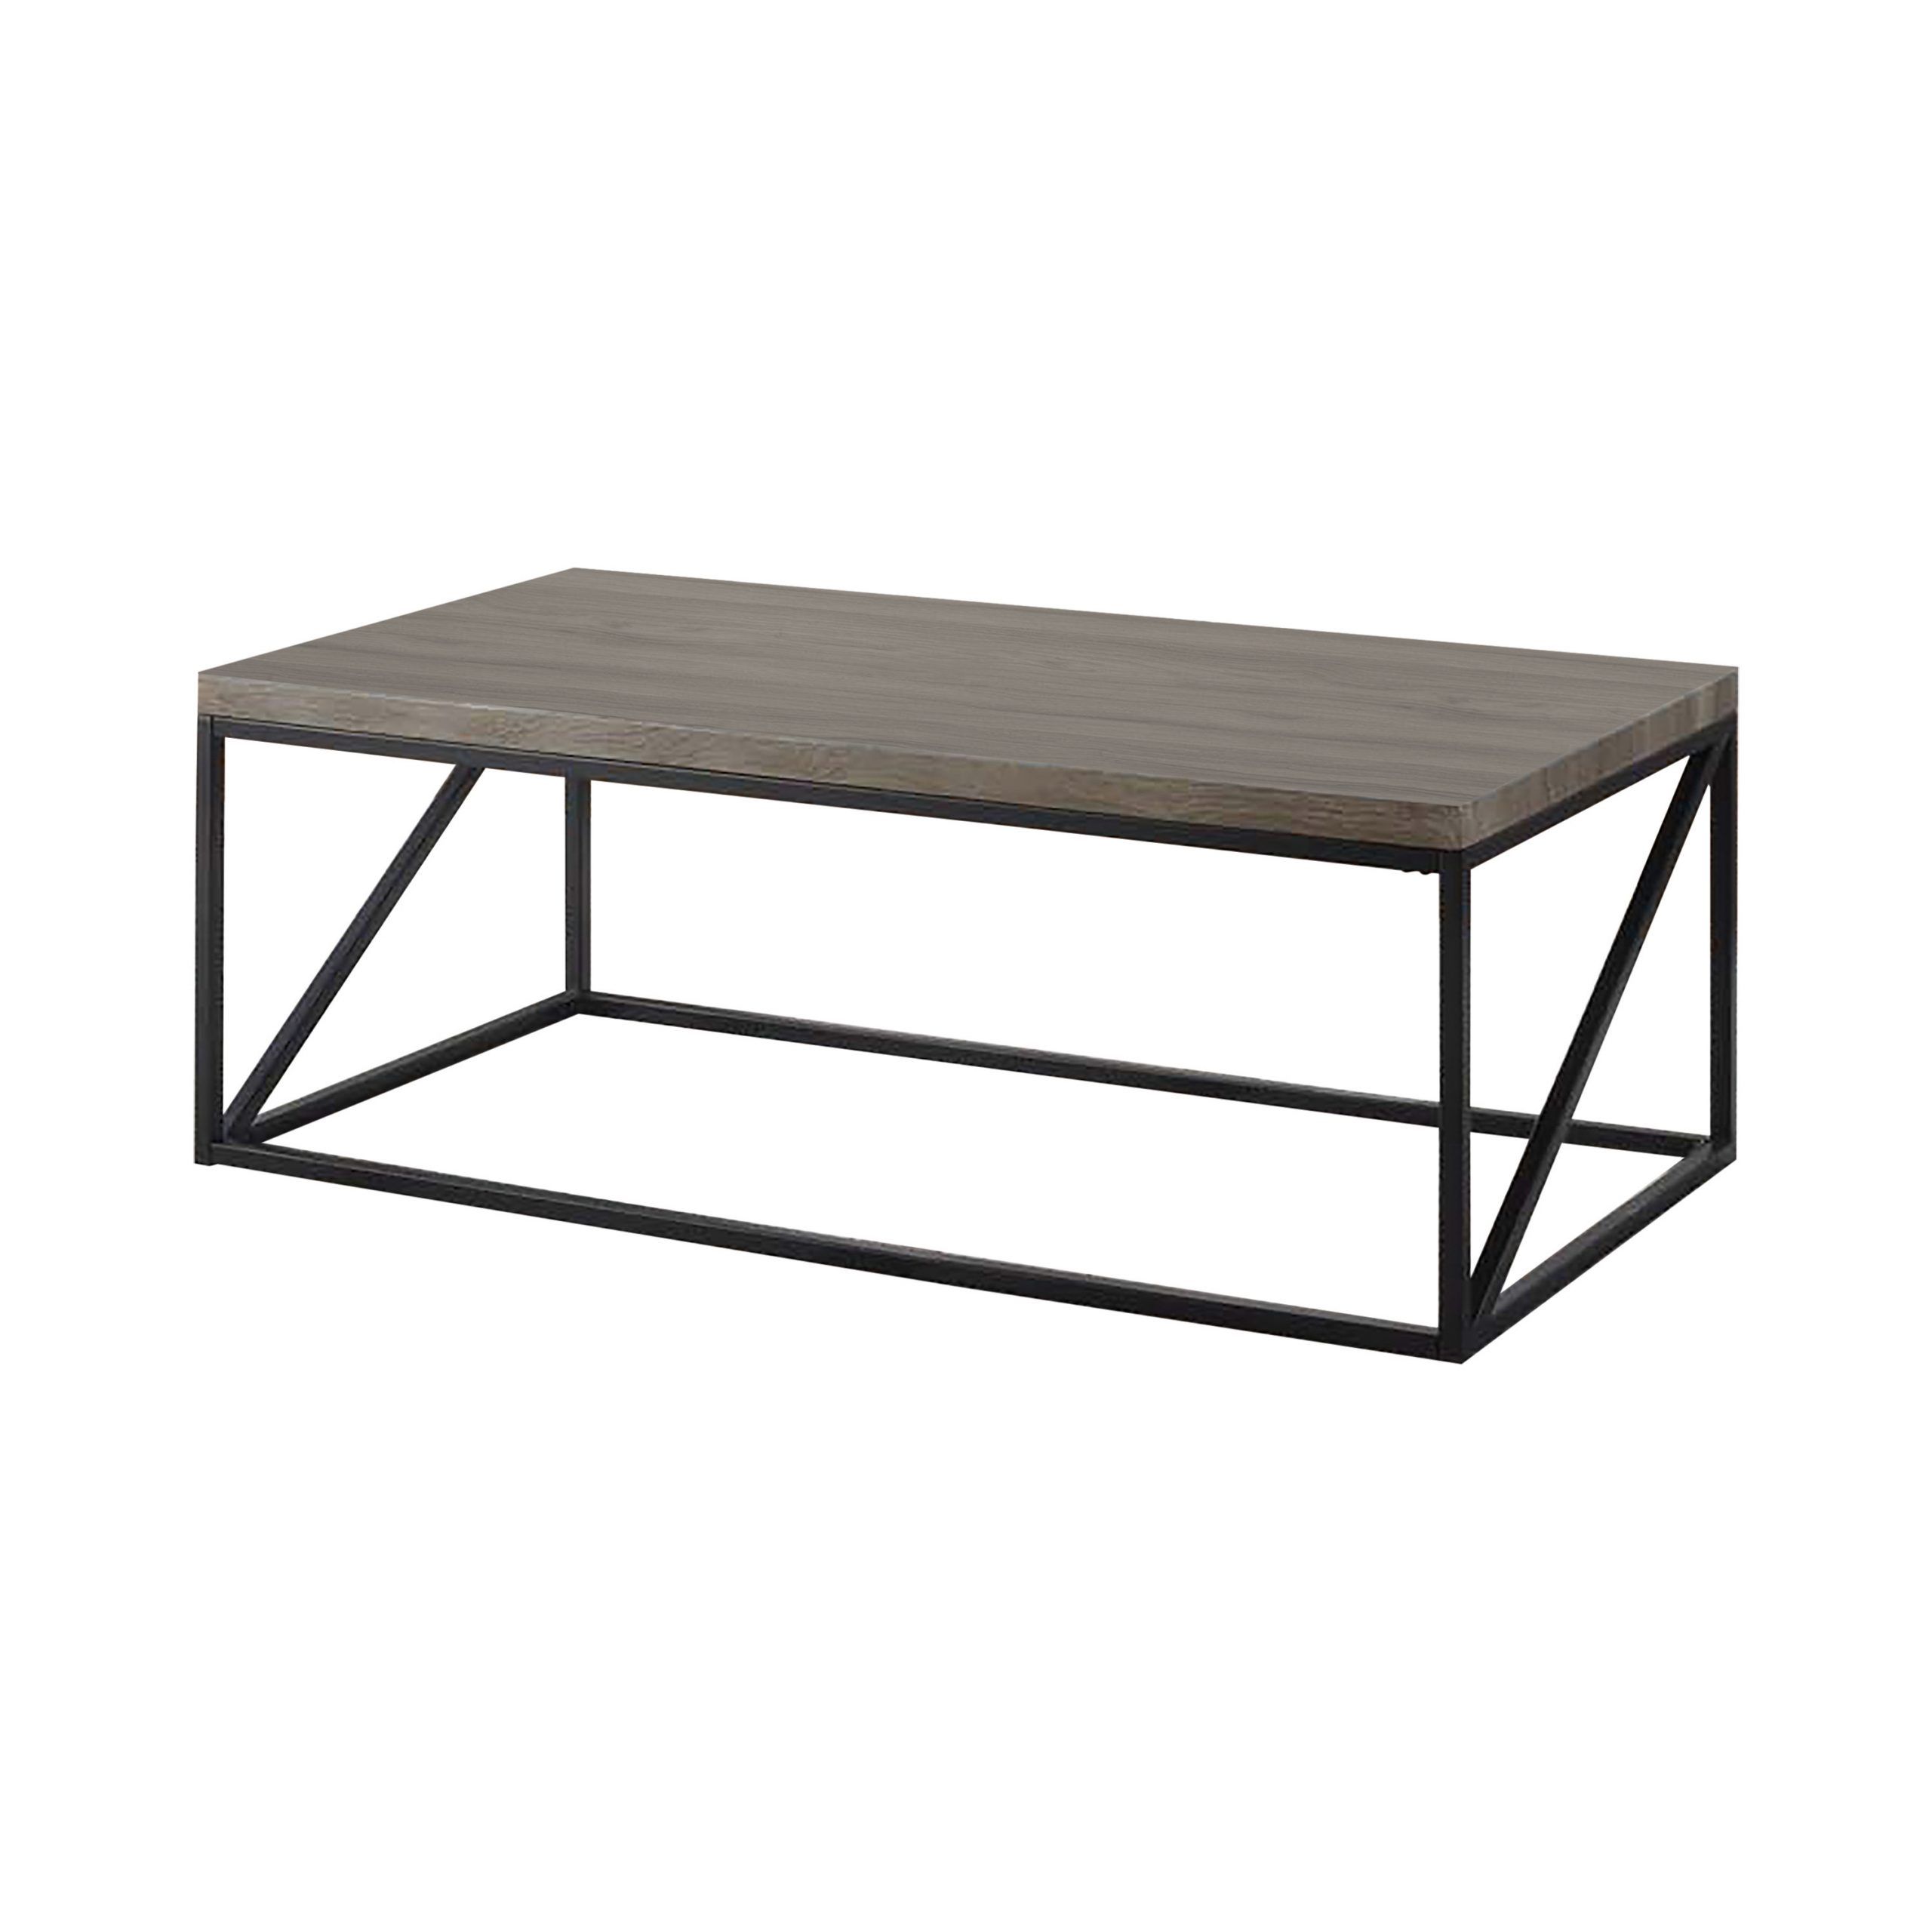 Rectangular Coffee Table Sonoma Grey – Coaster Fine Furniture With Smoke Gray Wood Square Console Tables (View 7 of 20)